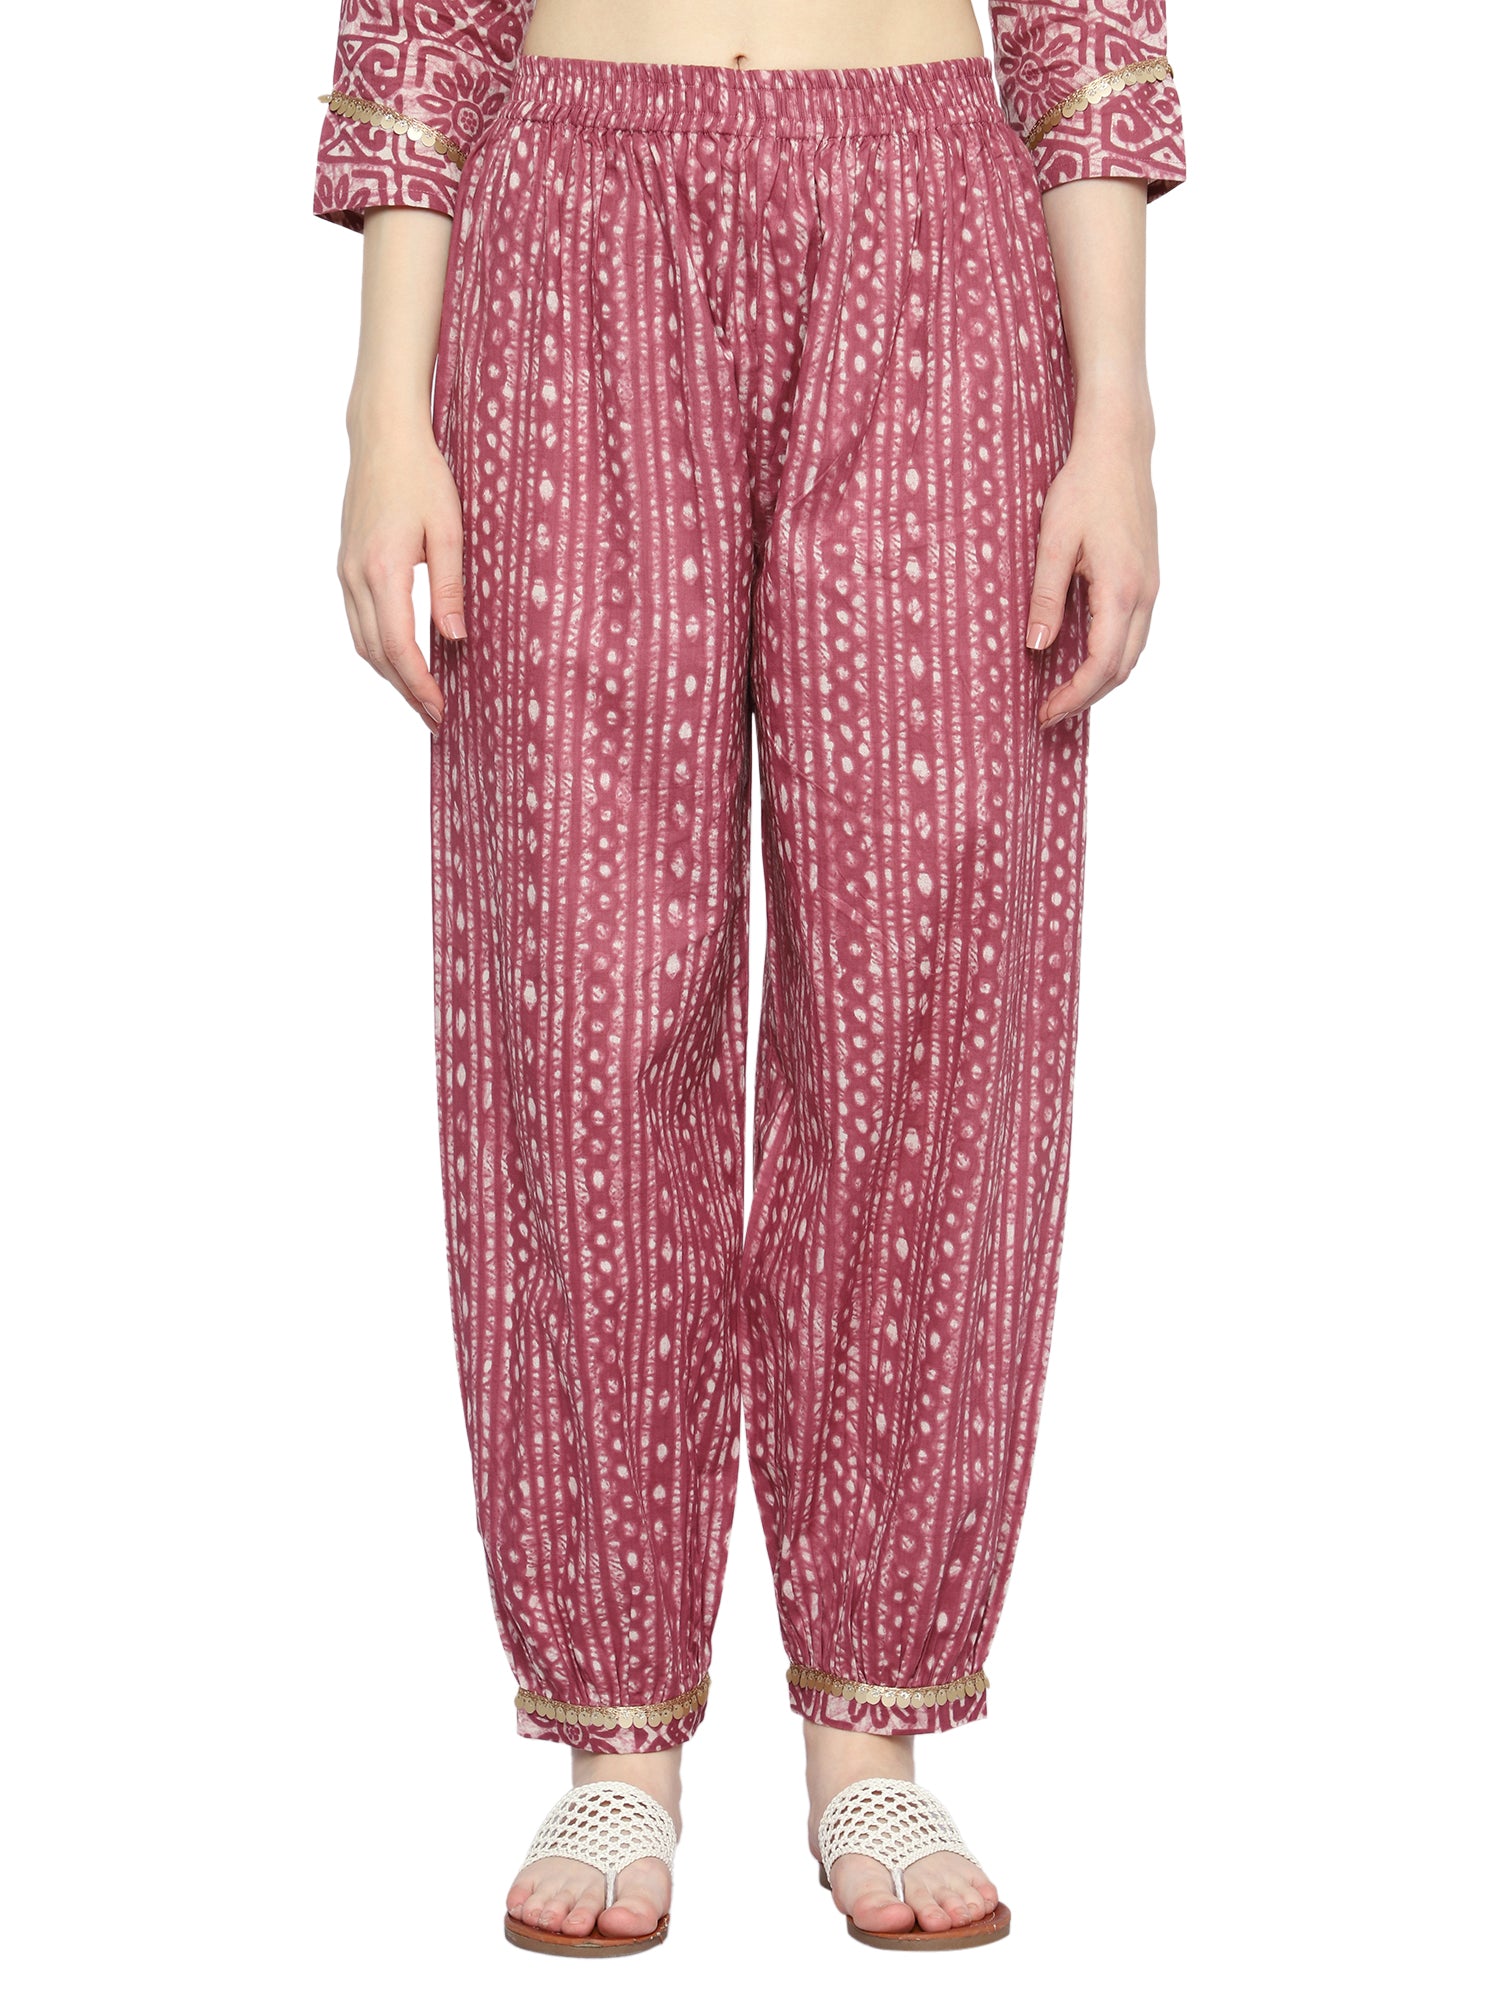 Maroon Rayon Ethnic Co-ord Set with Printed White Lines